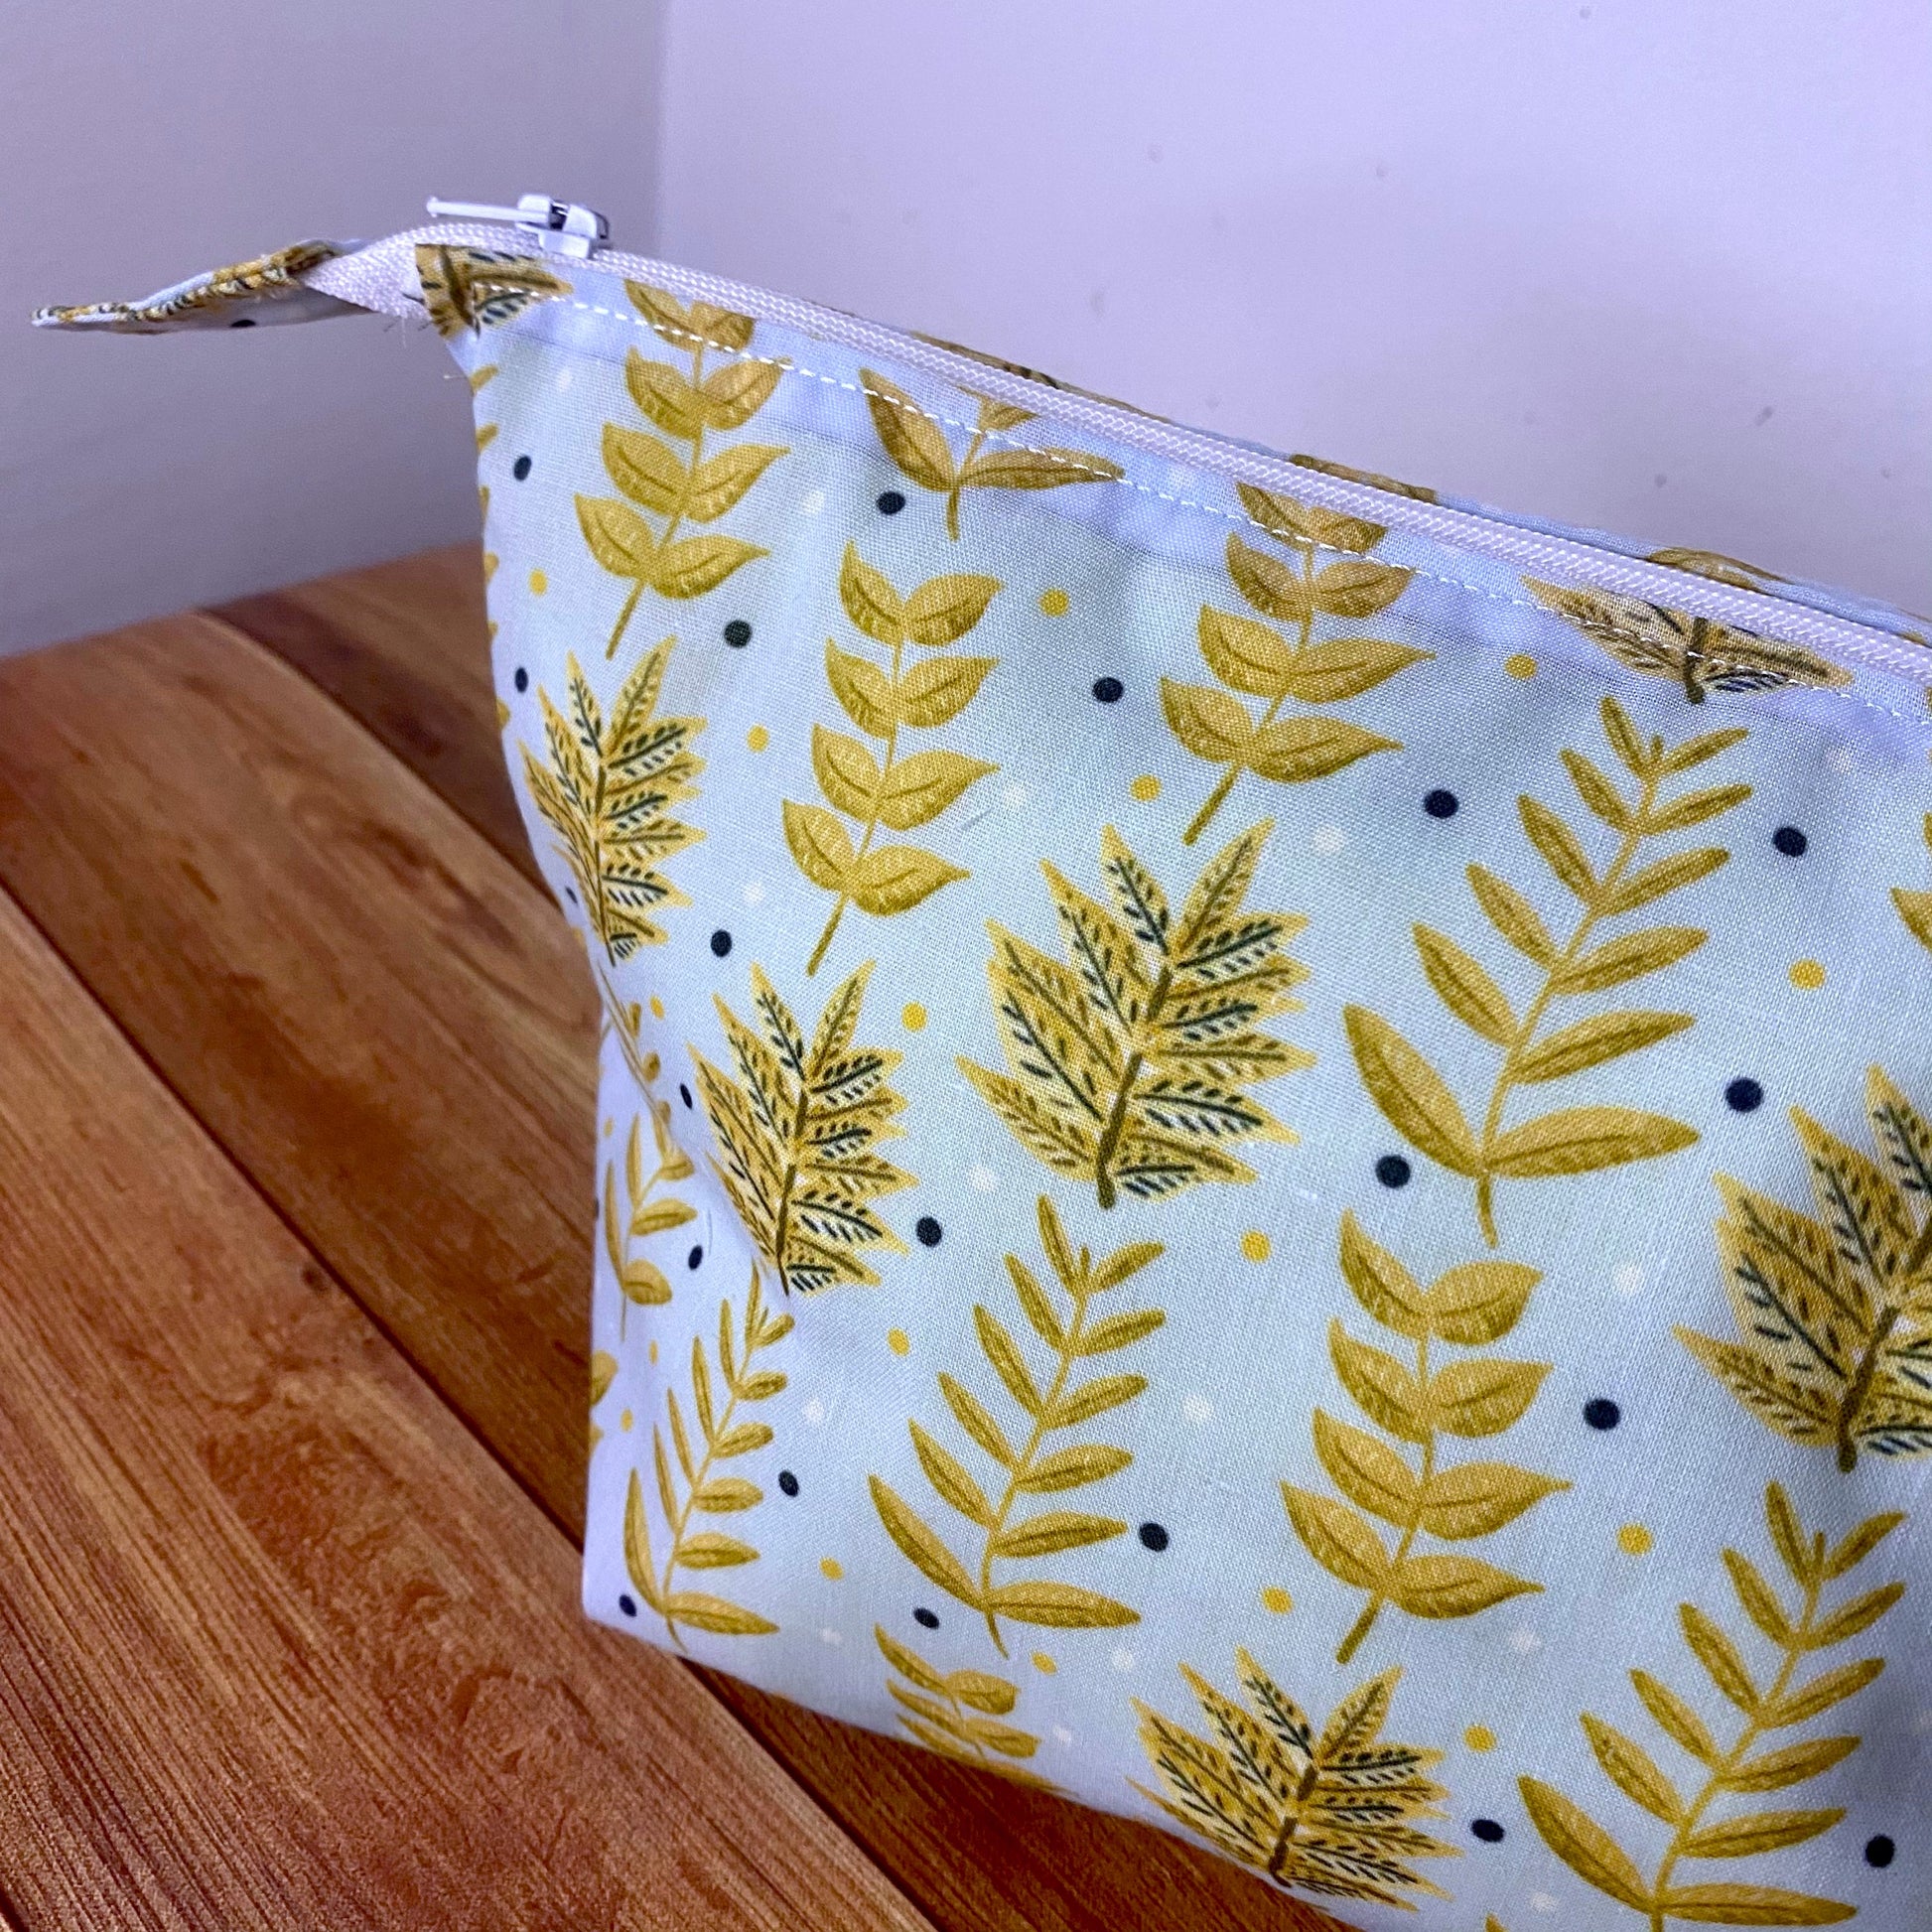 the yellow foliage patterned makeup bag shown stuffed to show the shape.